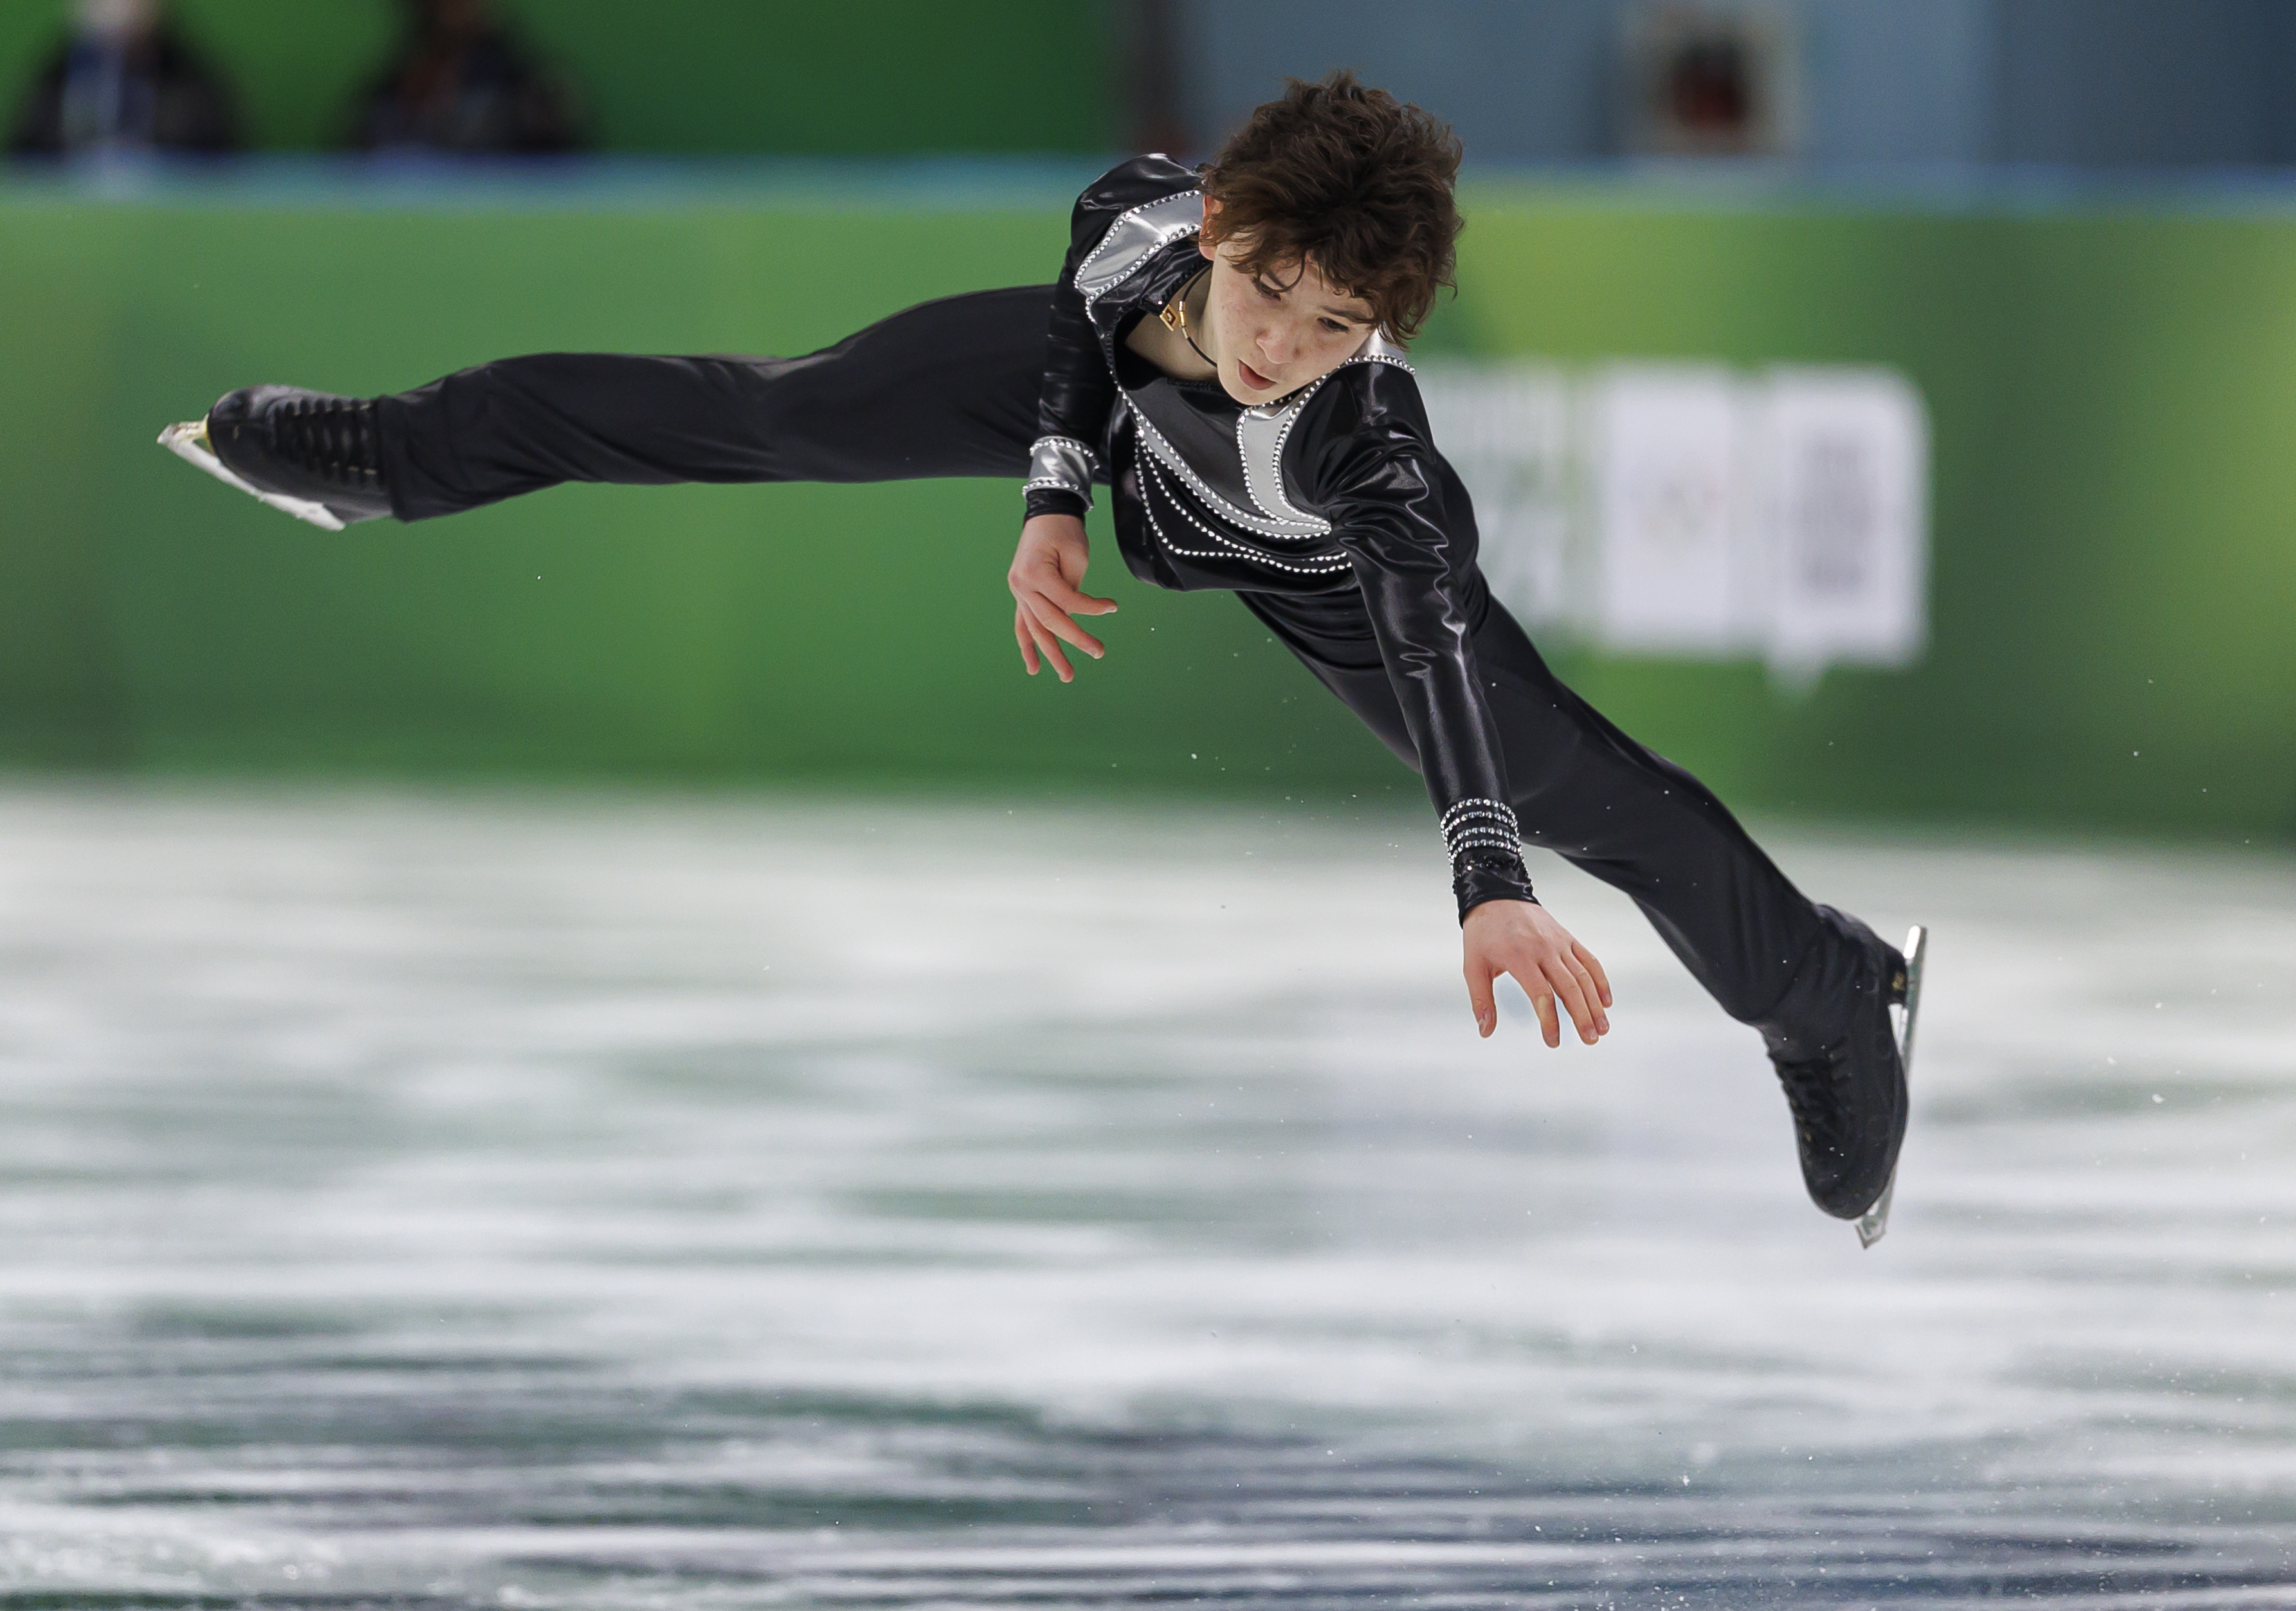 Nakata Rio (JPN) during his routine in the Men's Free Skating at the Gangneung Ice Arena on Monday